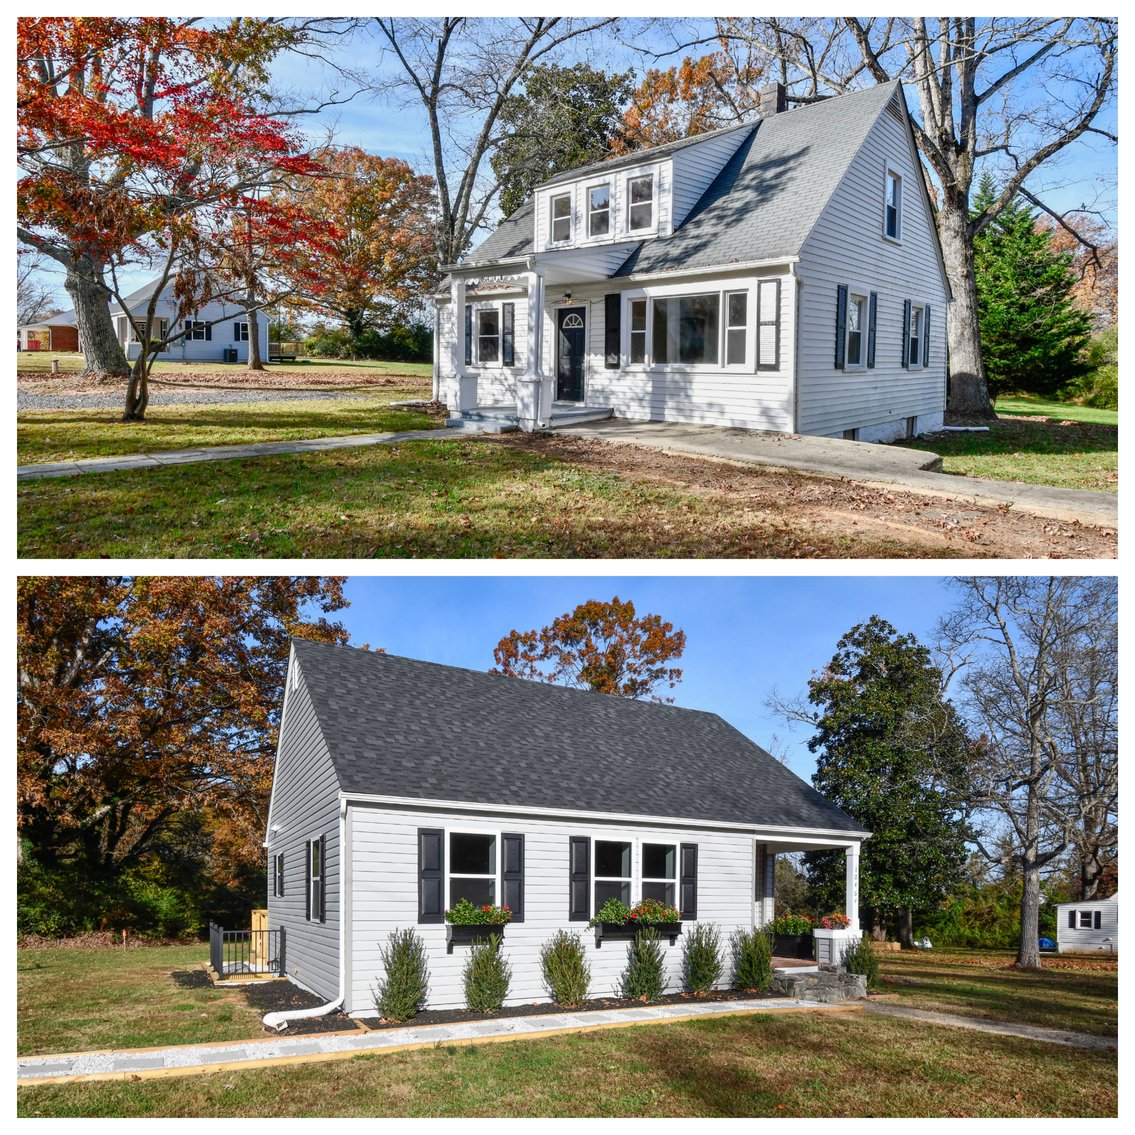 Image for 4 BR & 3 BR Income Producing Homes on 1.14 +/- Acres Being Offered Together For One Price in Orange County, VA--ONLINE ONLY BIDDING!!